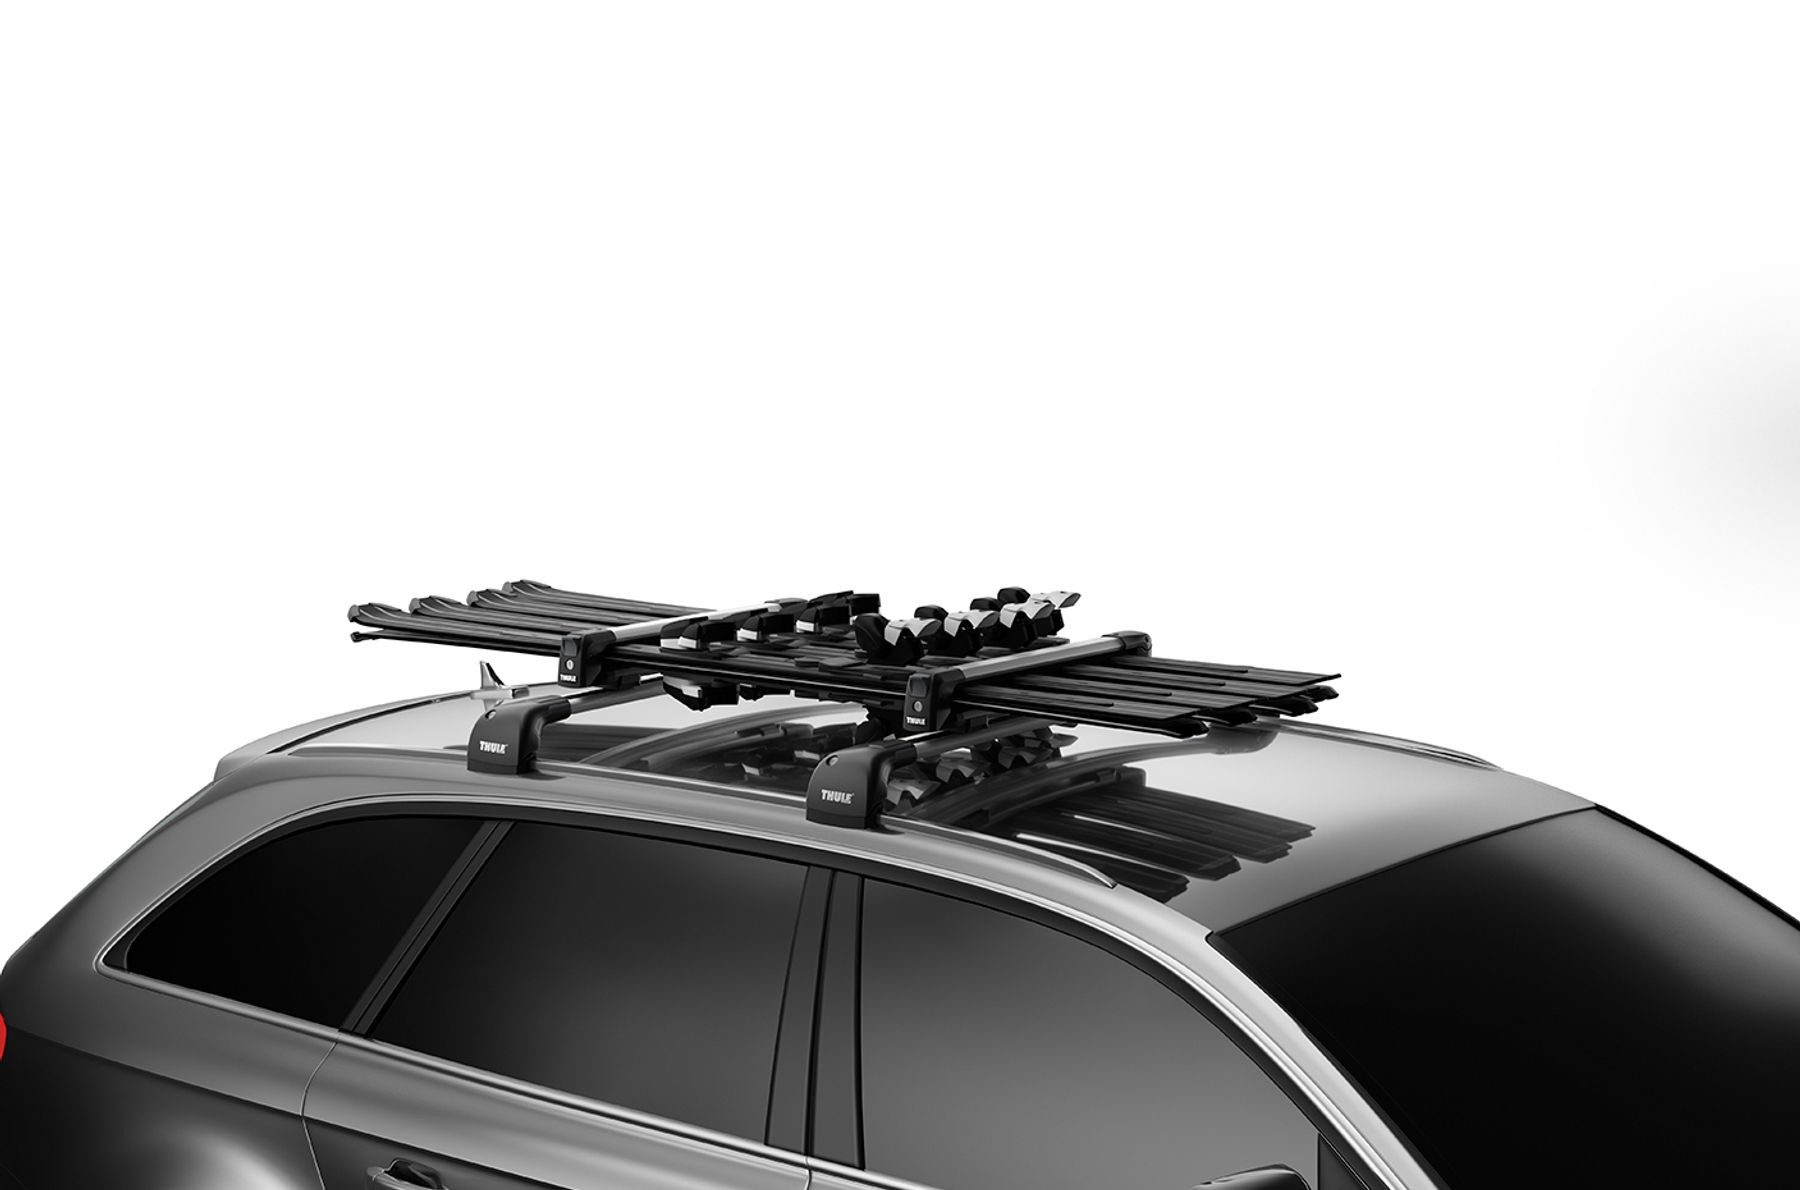 Thule SnowPack Roof-Mounted Ski & Snowboard Carrier 